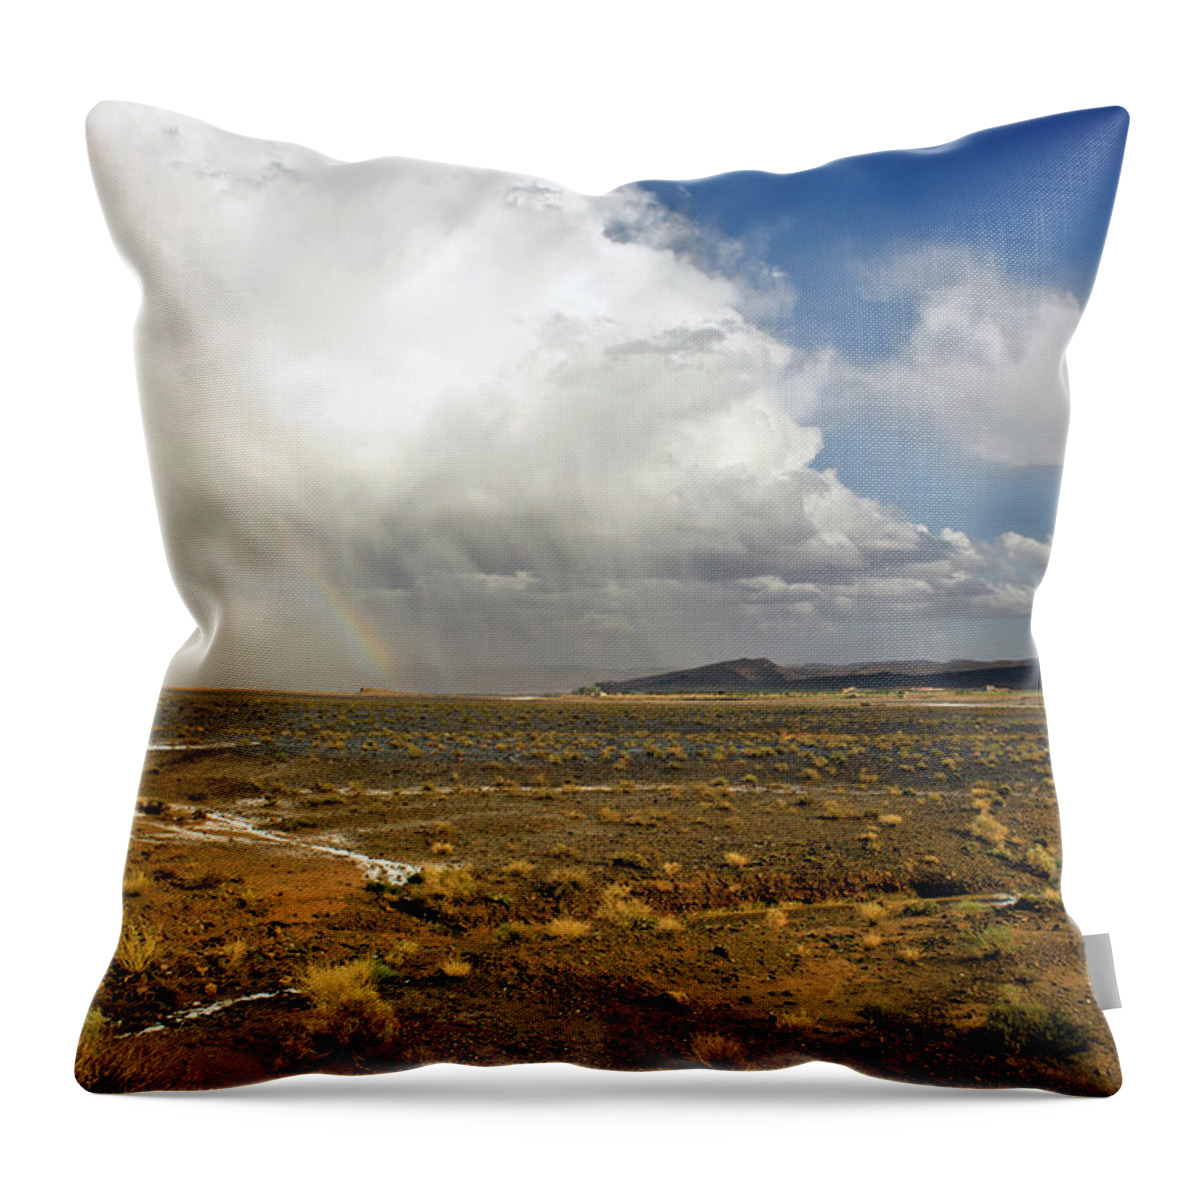 Scenics Throw Pillow featuring the photograph Rainbow After Storm In Moroccan Desert by Pavliha